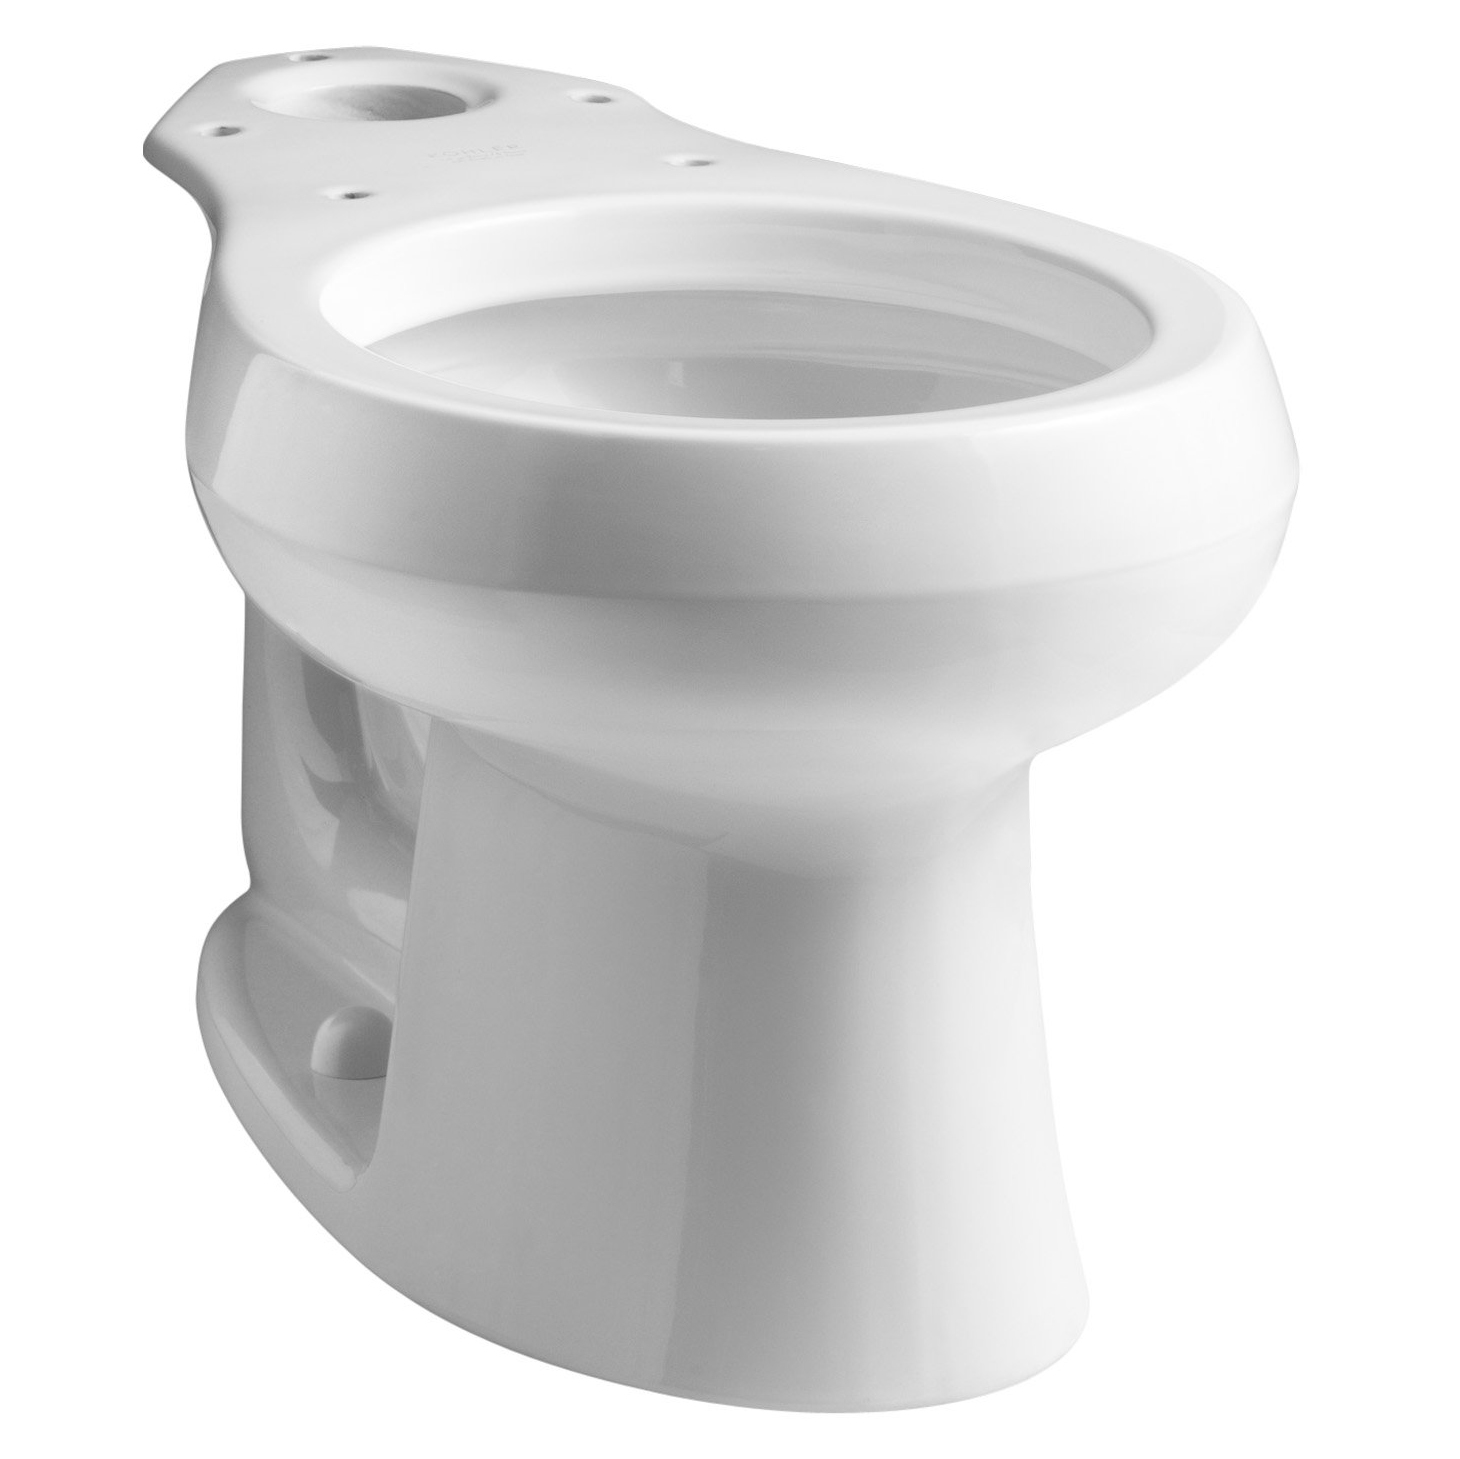 Wellworth Round Front Toilet Bowl Only in White **SEAT NOT INCLUDED**